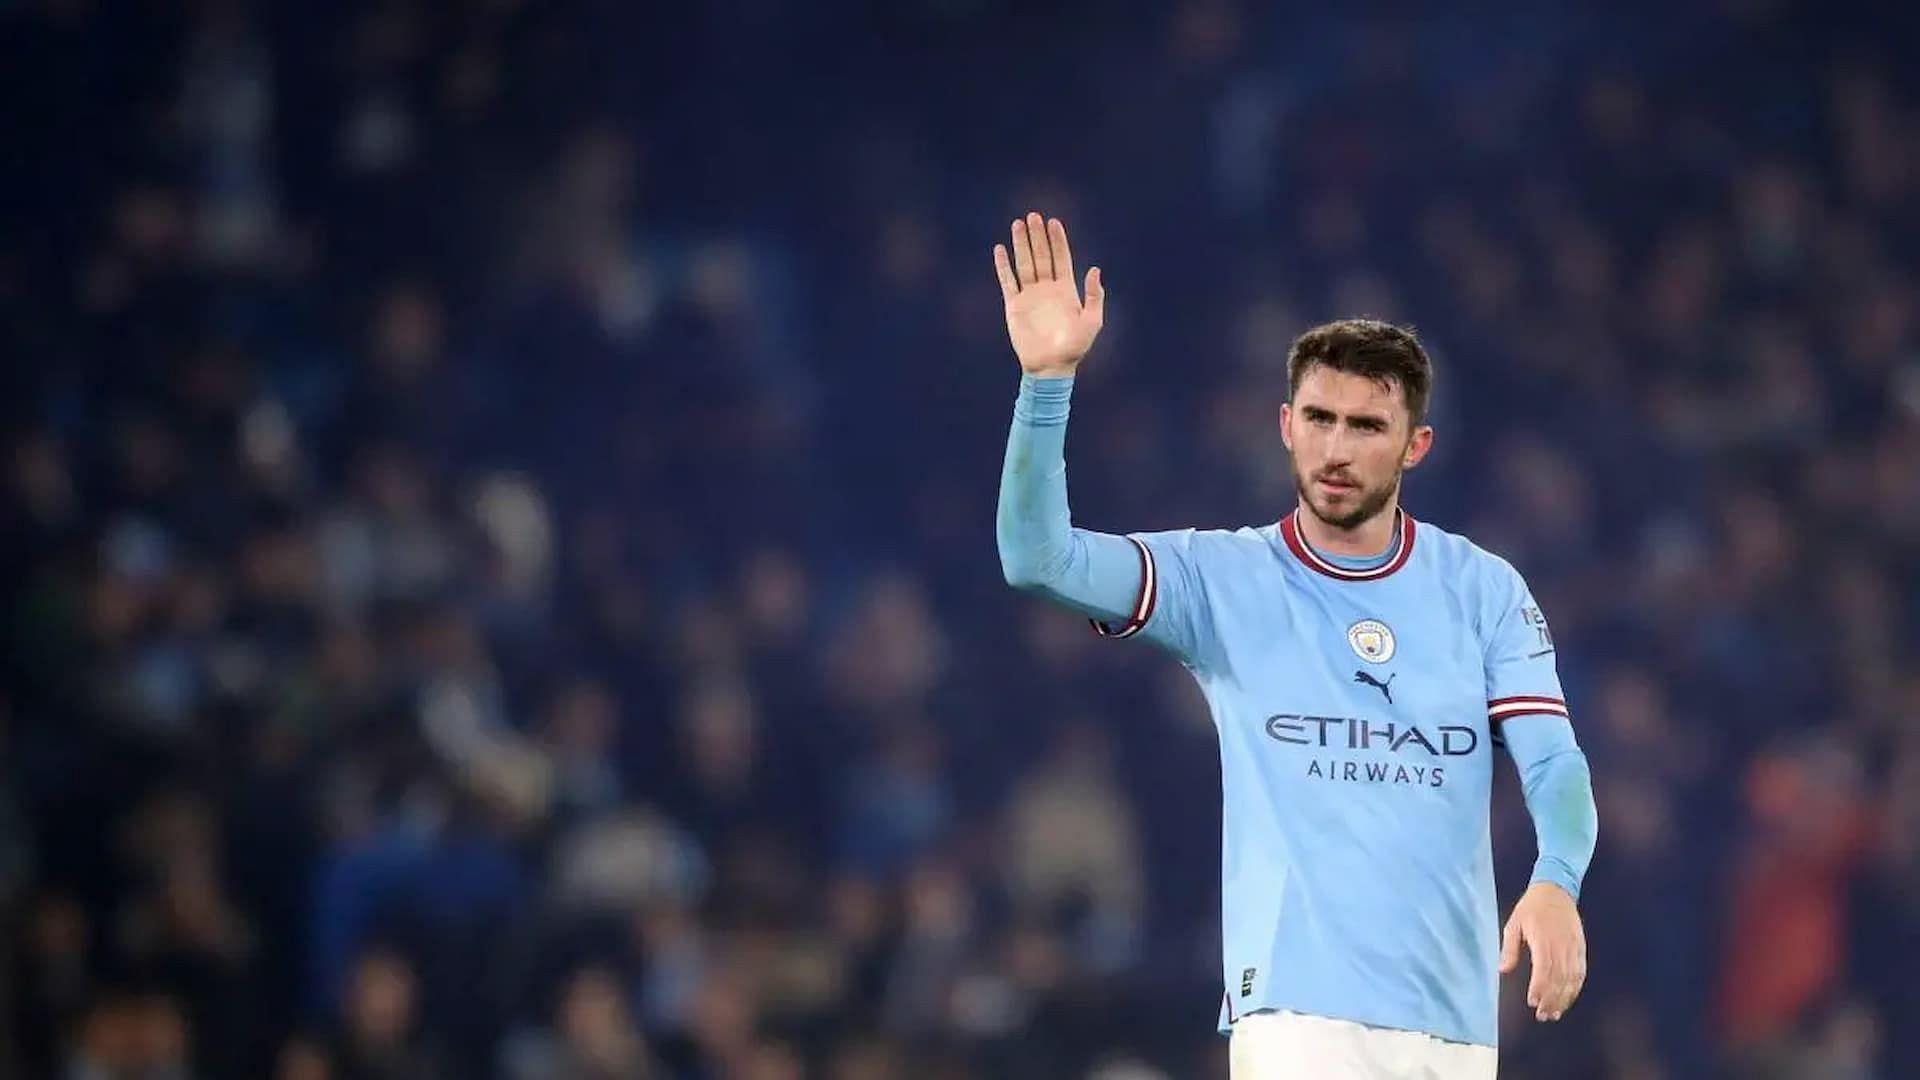 Aymeric Laporte at Manchester City (Image via Getty)